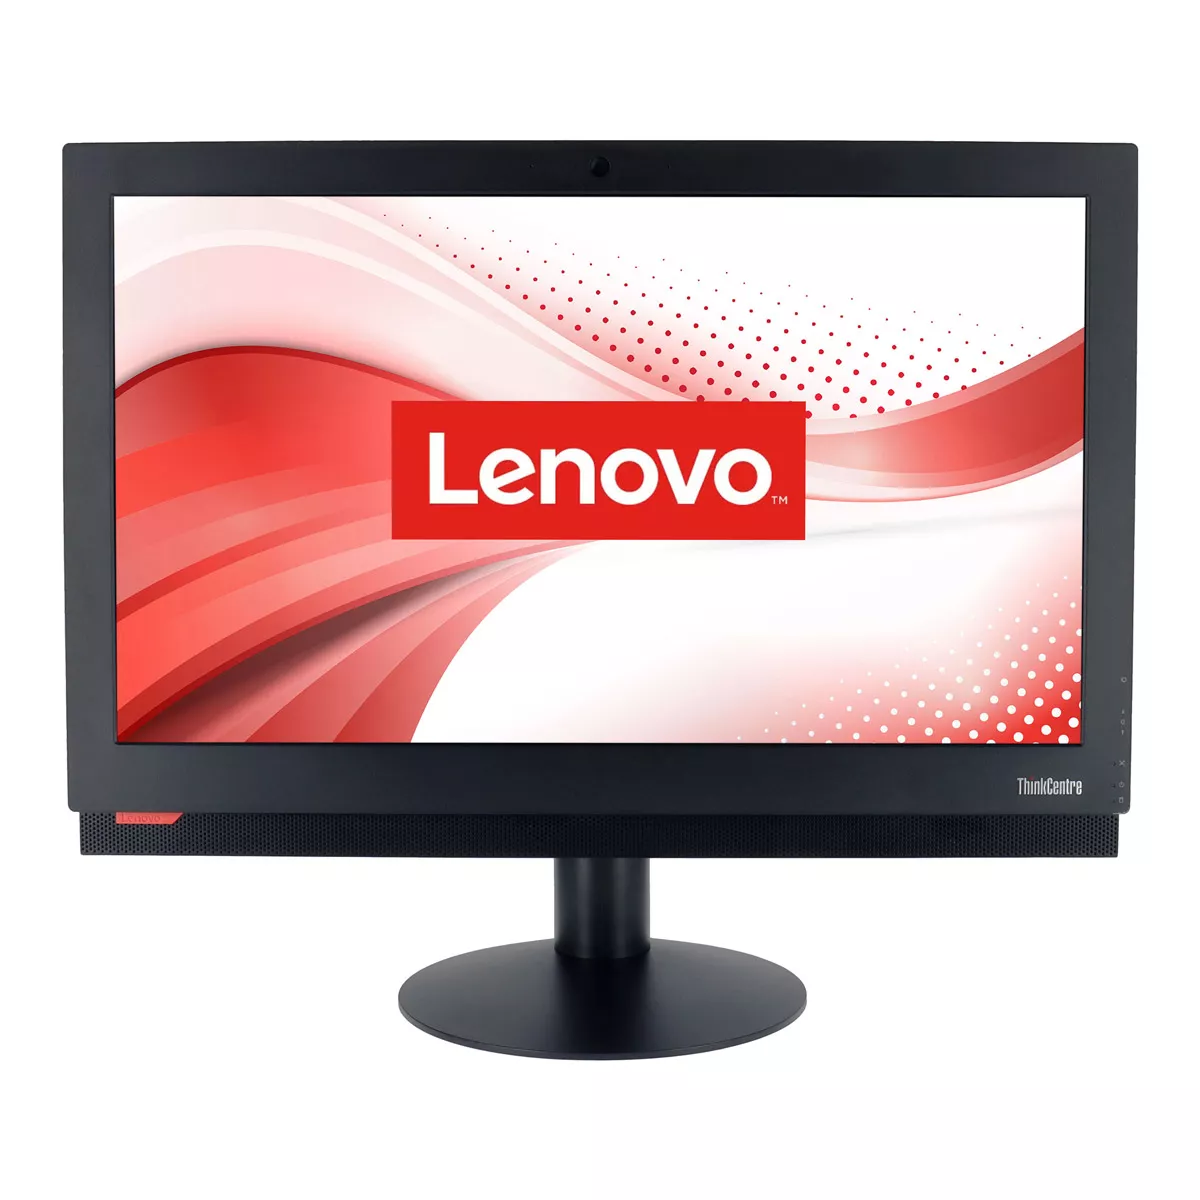 All-in-One Lenovo M810z Pentium G4560 21,5 Zoll 1920x1080 8 GB 500 GB HDD A+